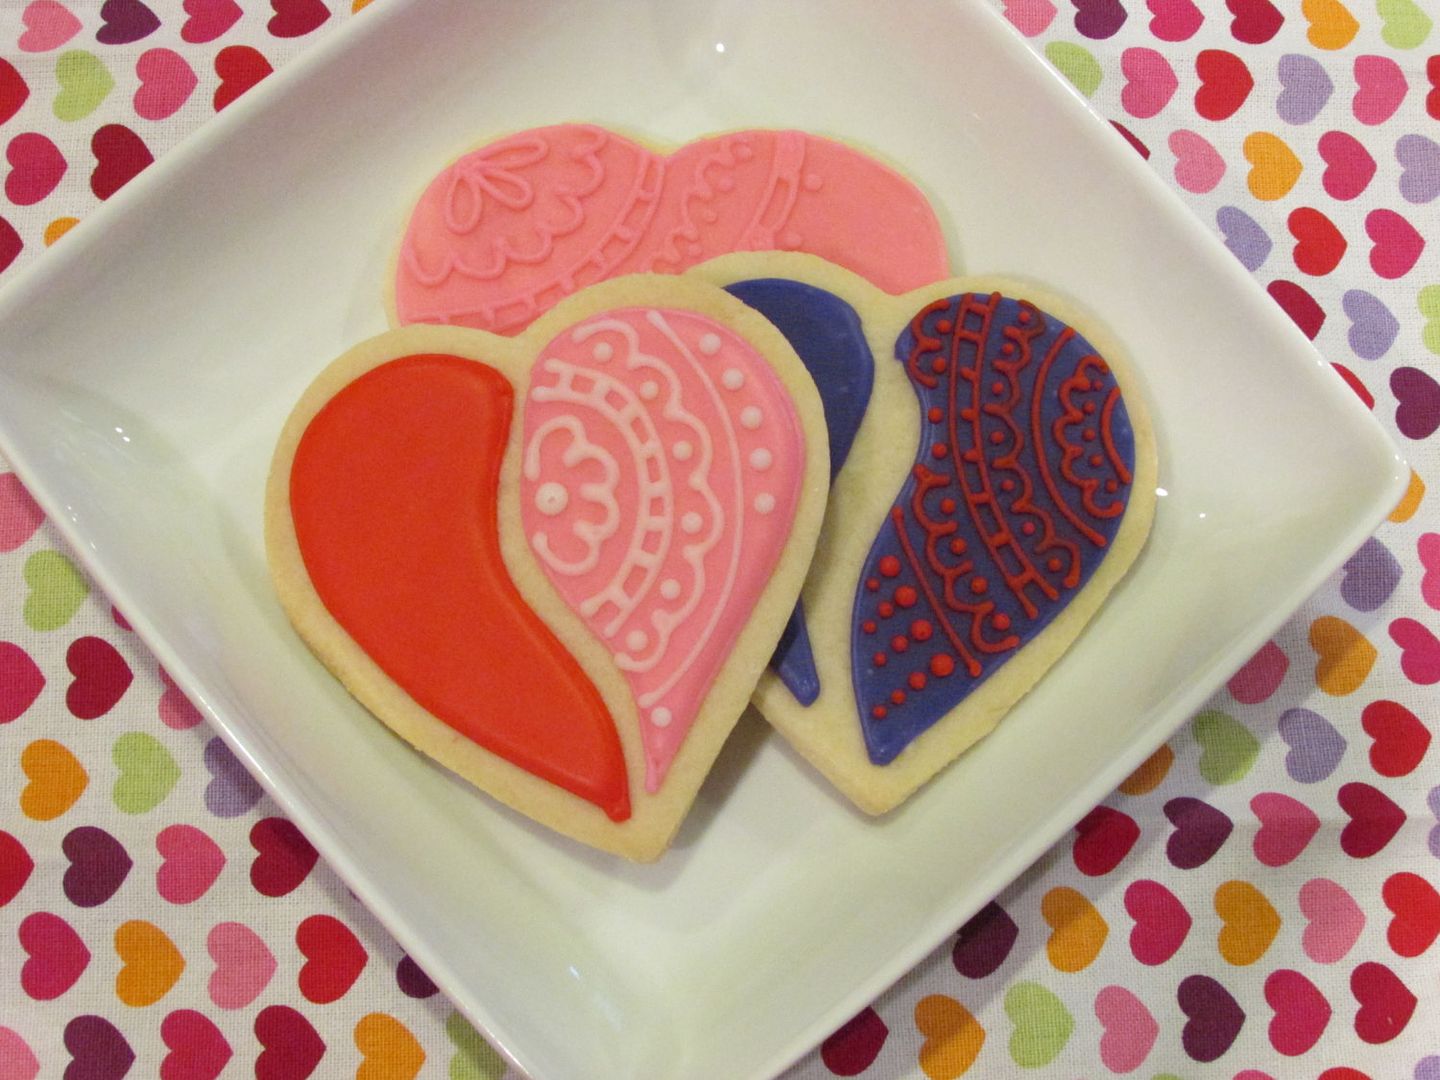 Cool Valentine's cookies: Mendhi hearts from Sparkle and Sprinkle